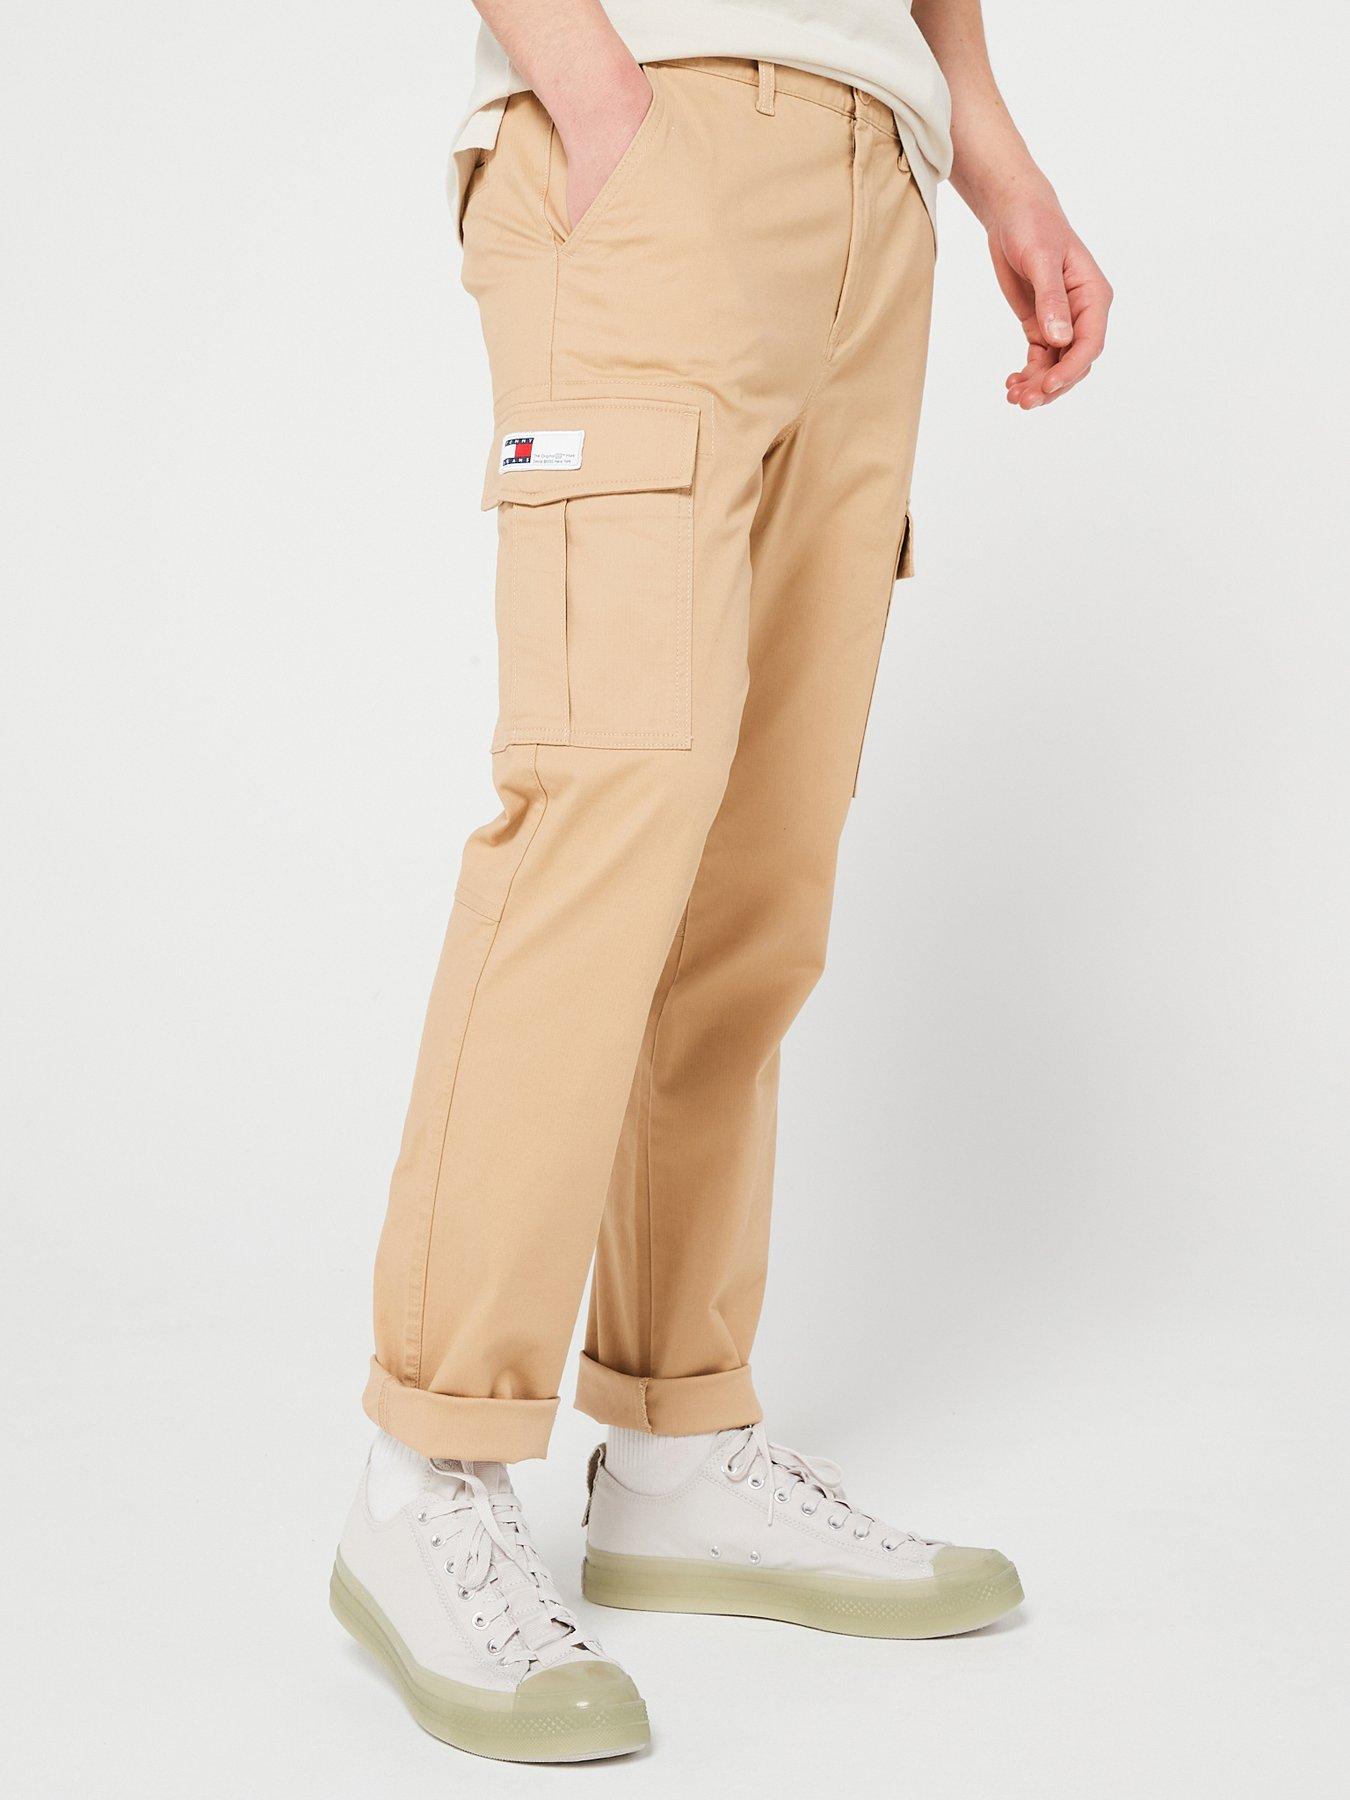 Amazon.com: Men's Cargo Trousers Casual Lightweight Pants Multi-Pocket  Elastic Waist Trousers Outdoor Hiking,A,Medium : Clothing, Shoes & Jewelry